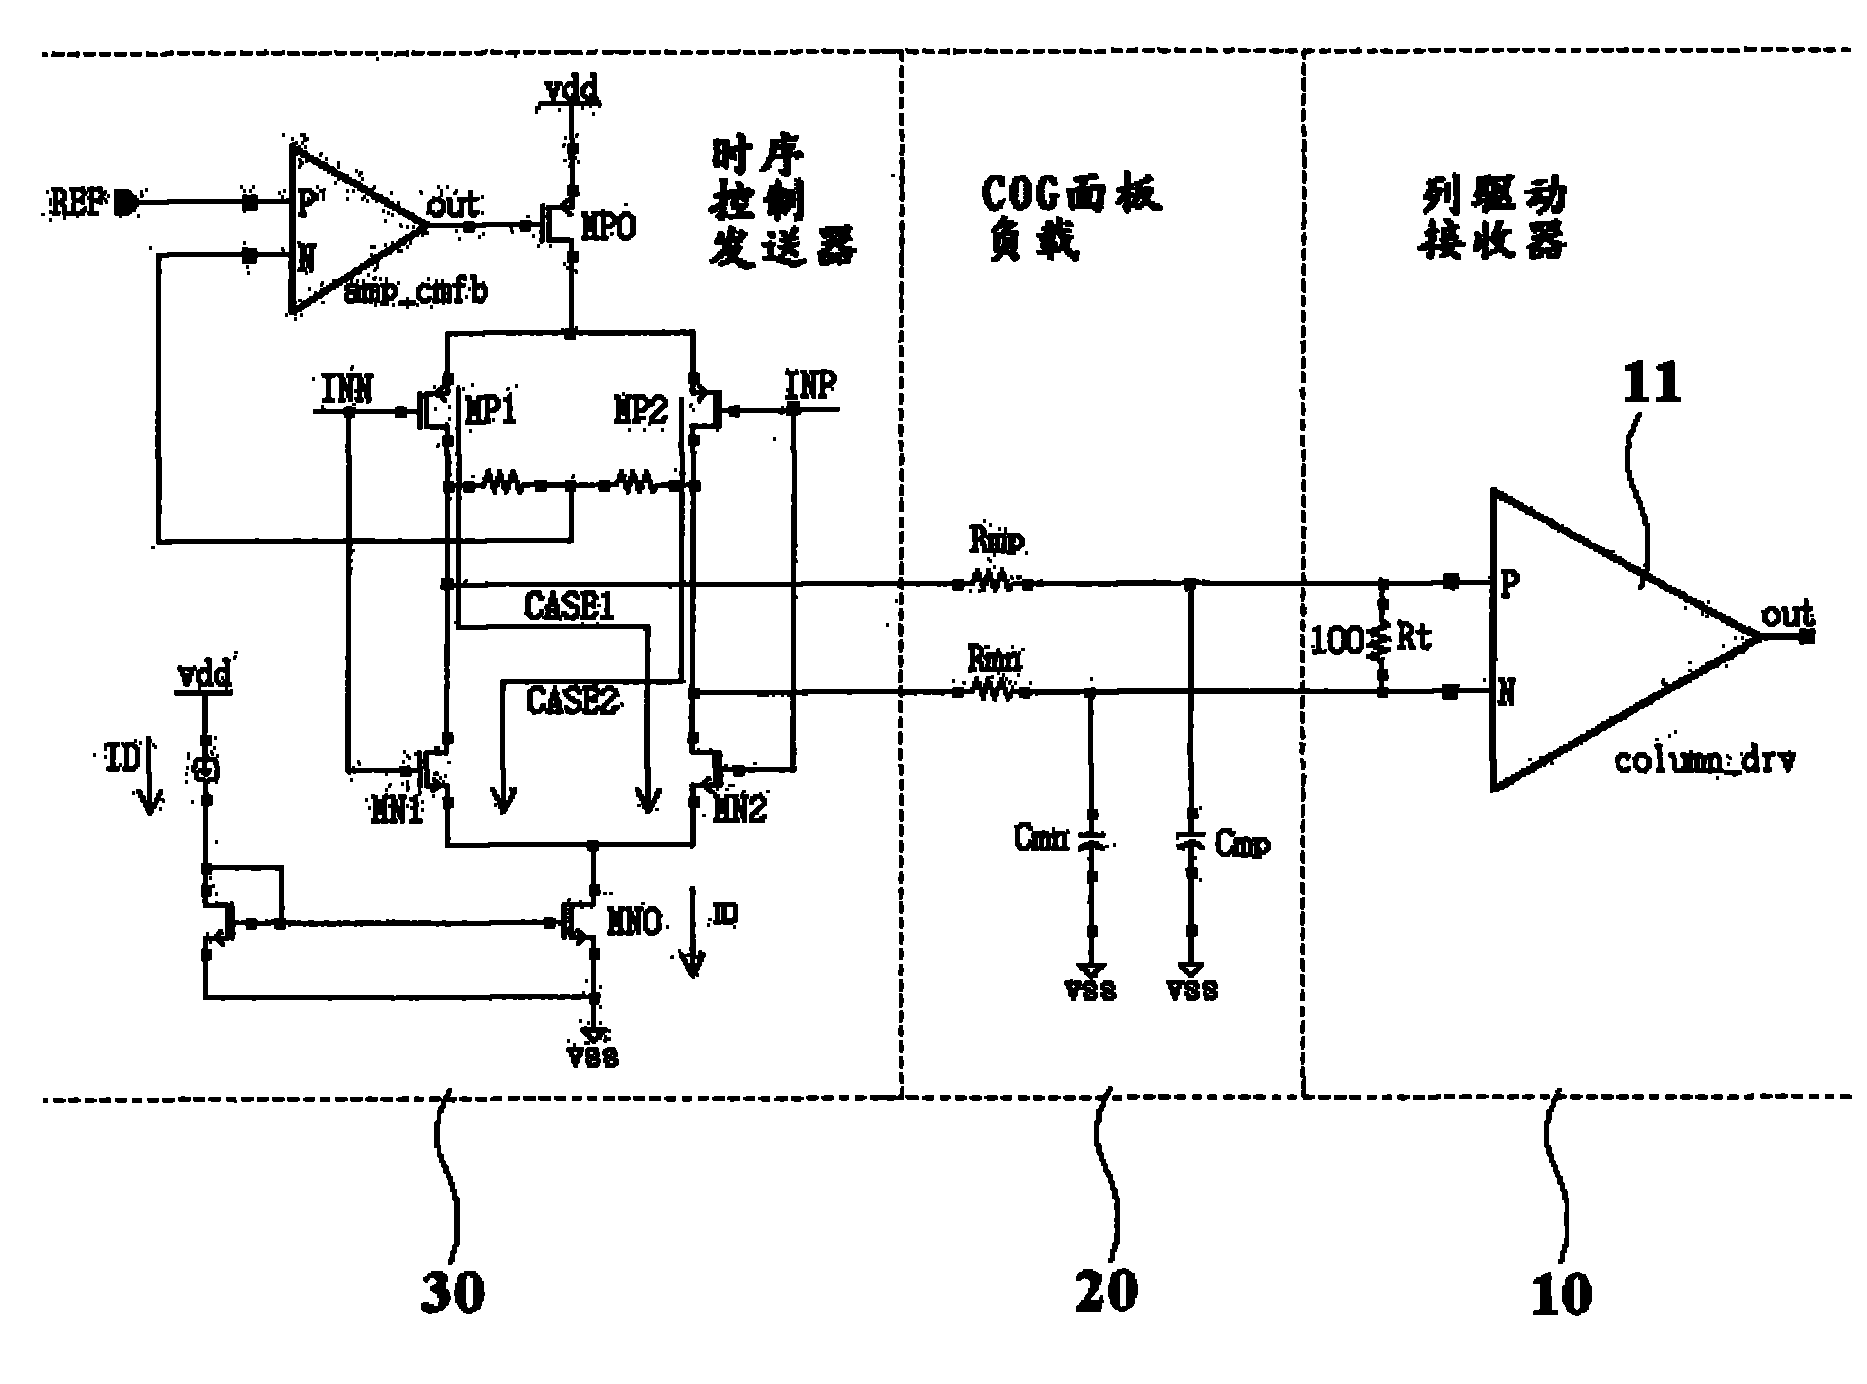 Differential signaling serial interface circuit